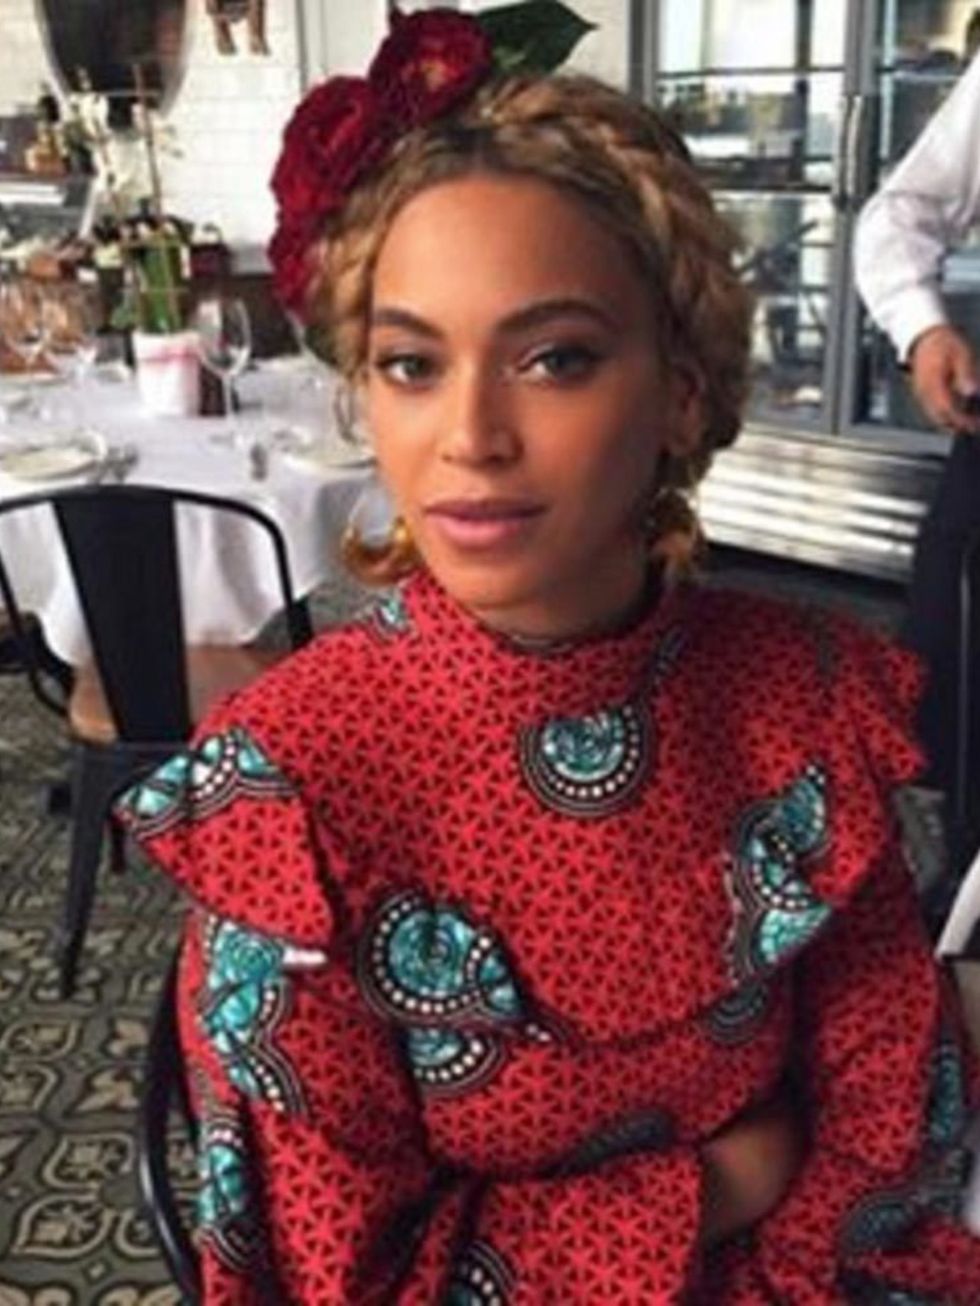 beyonce-red-outfit-may-2016-instagram-gallery